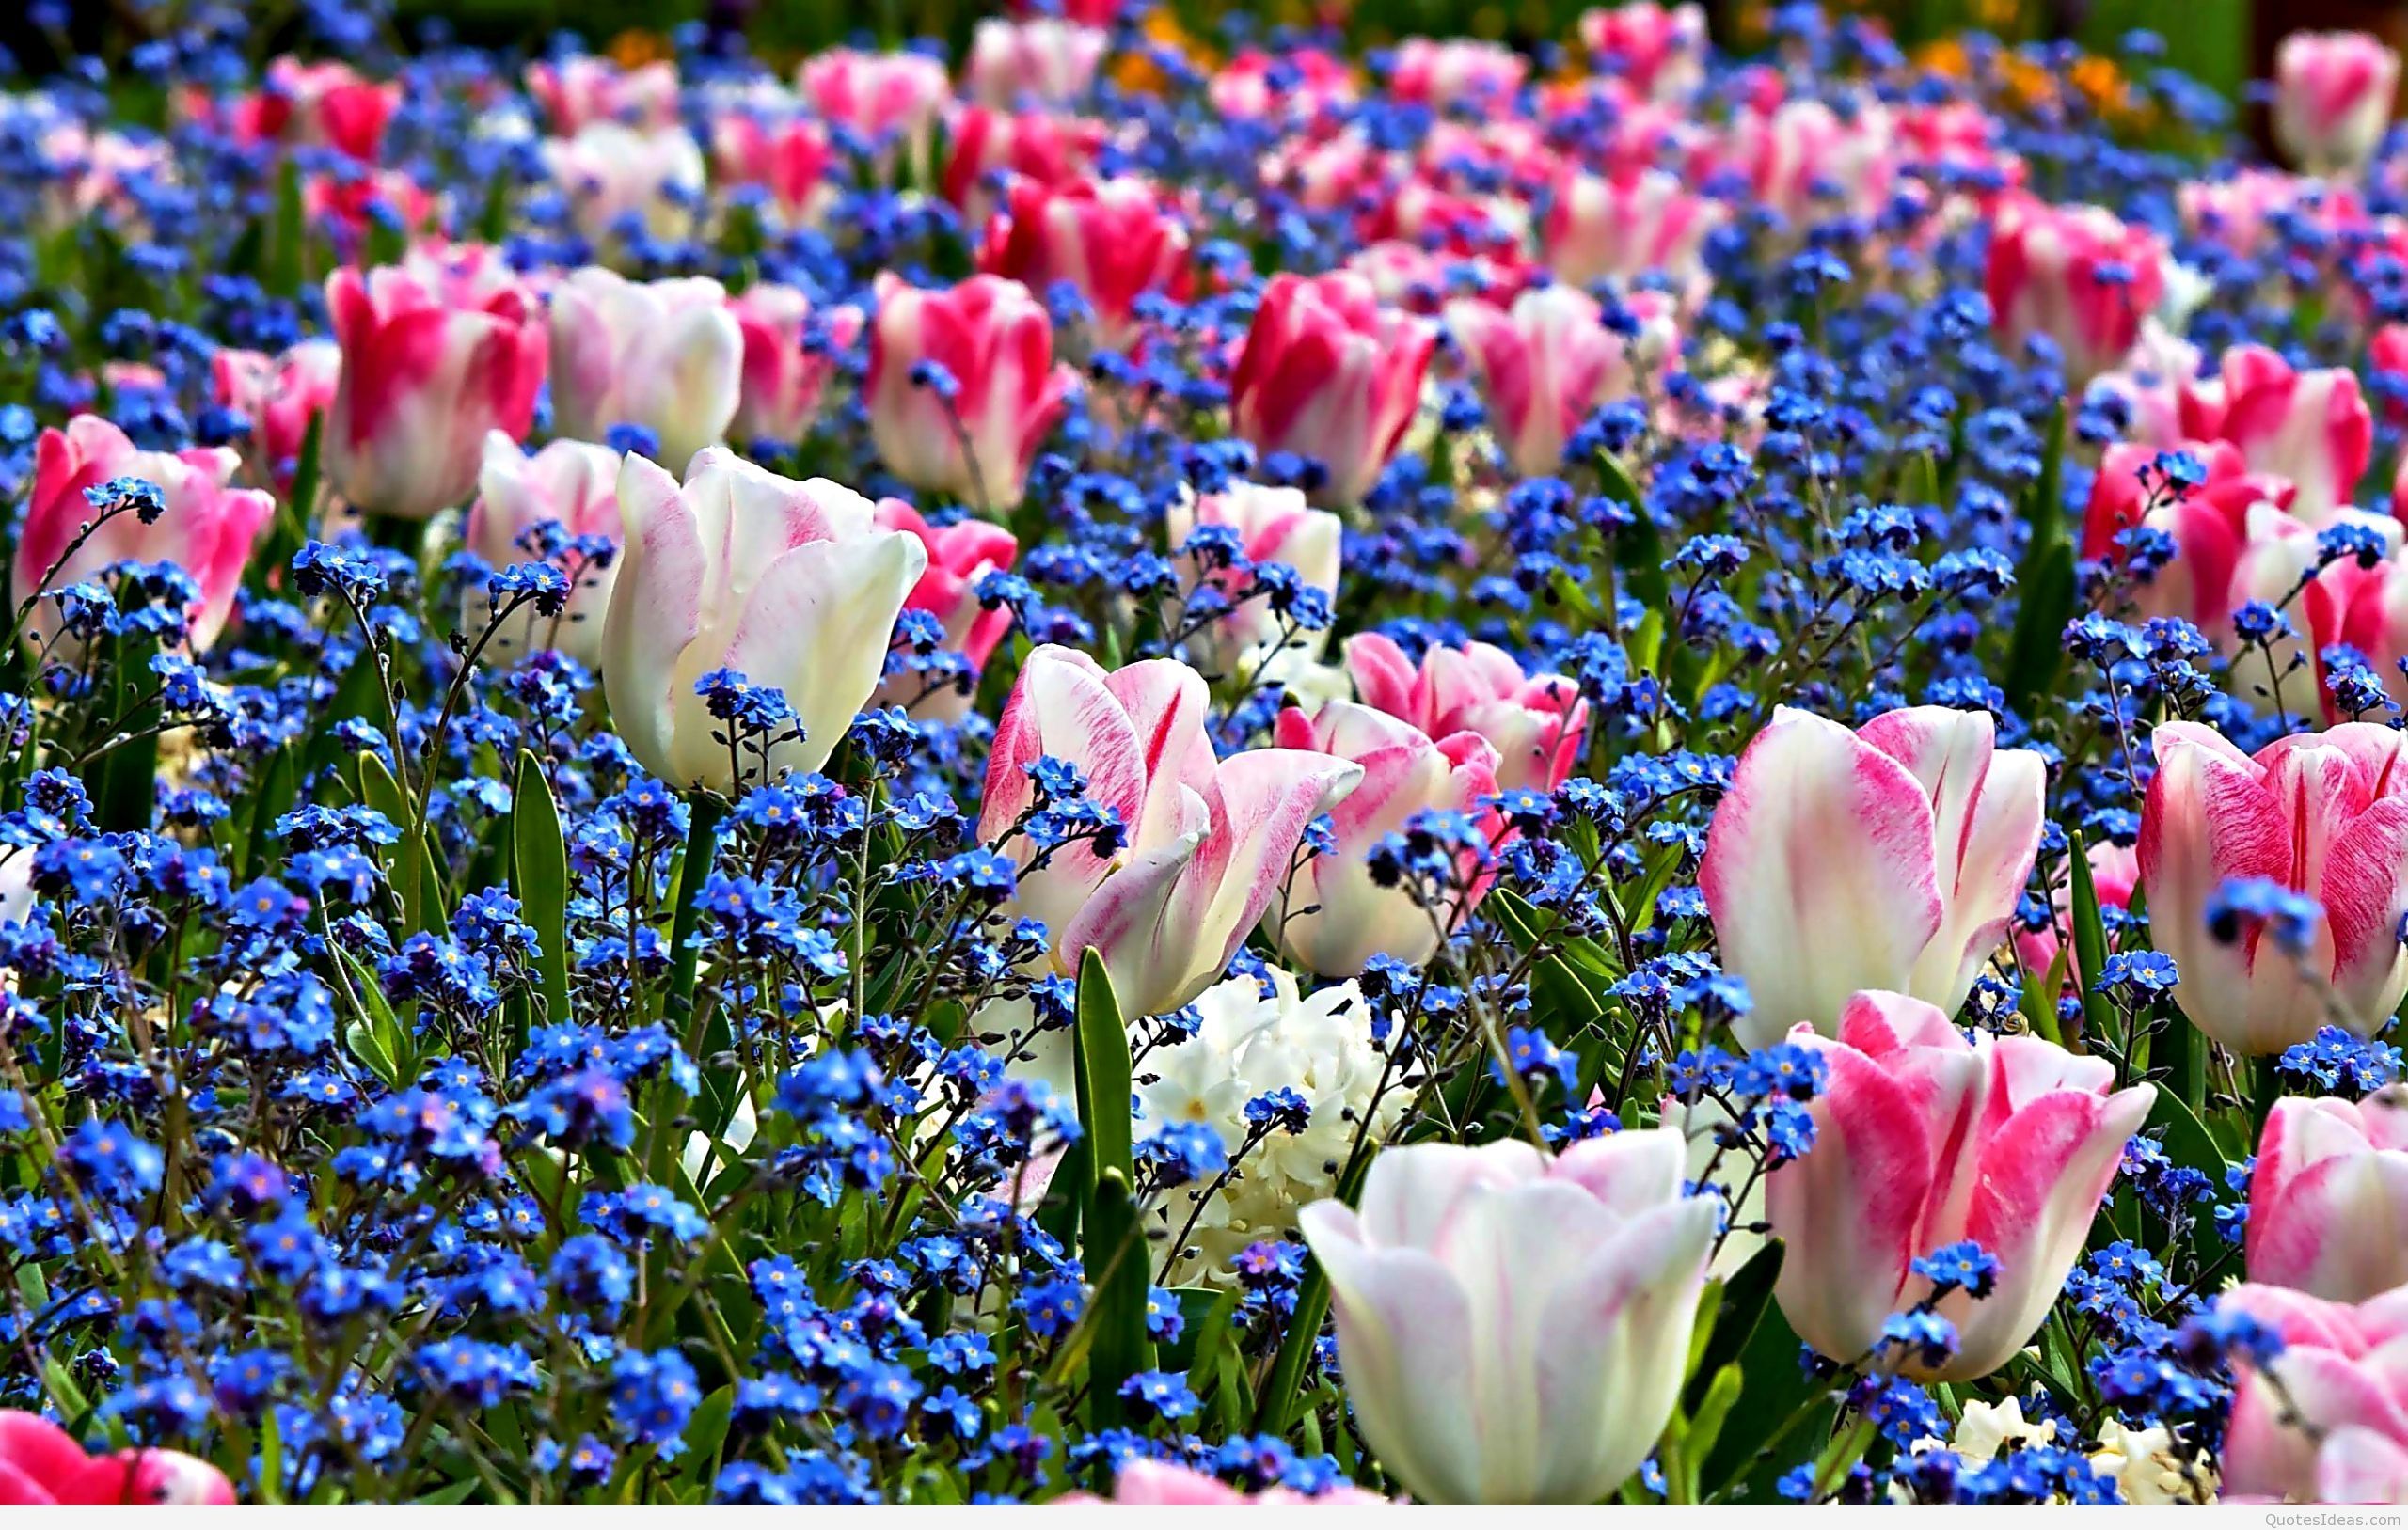 Awesome Spring wallpaper photo .favopicture.blogspot.com